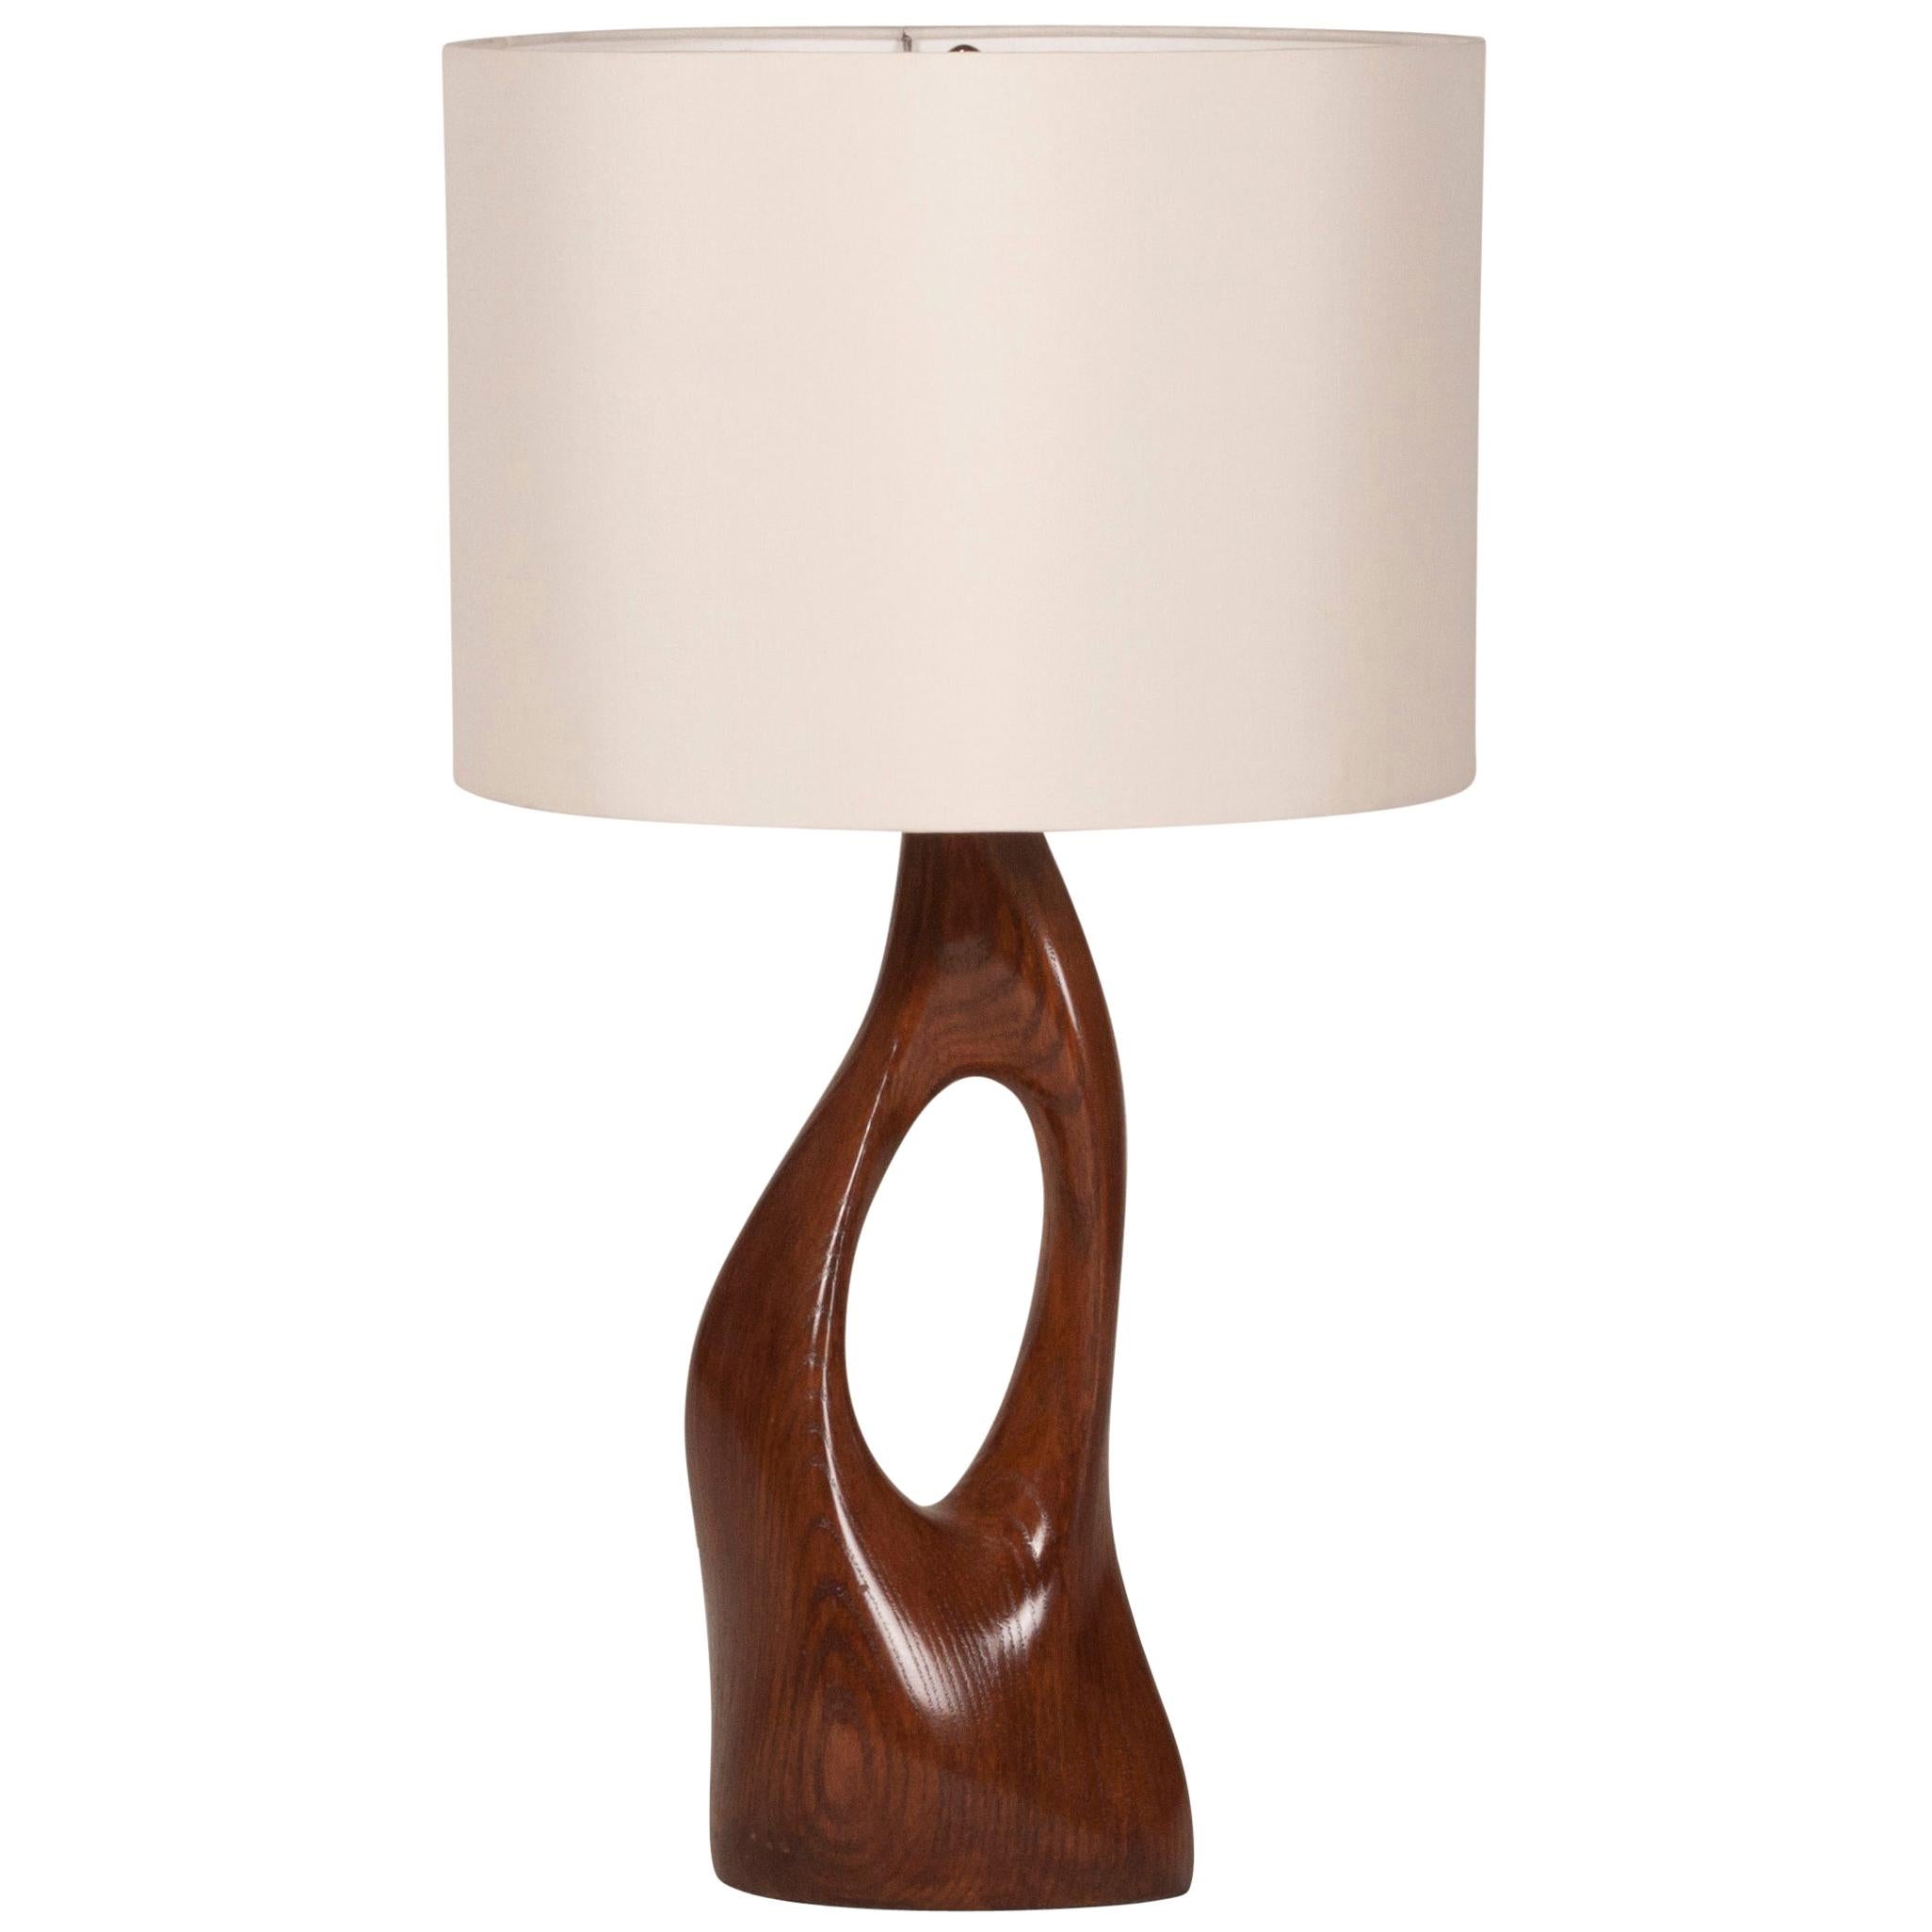 Amorph Helix Table Lamp, Solid wood, Walnut Finish with Ivory Silk Shade